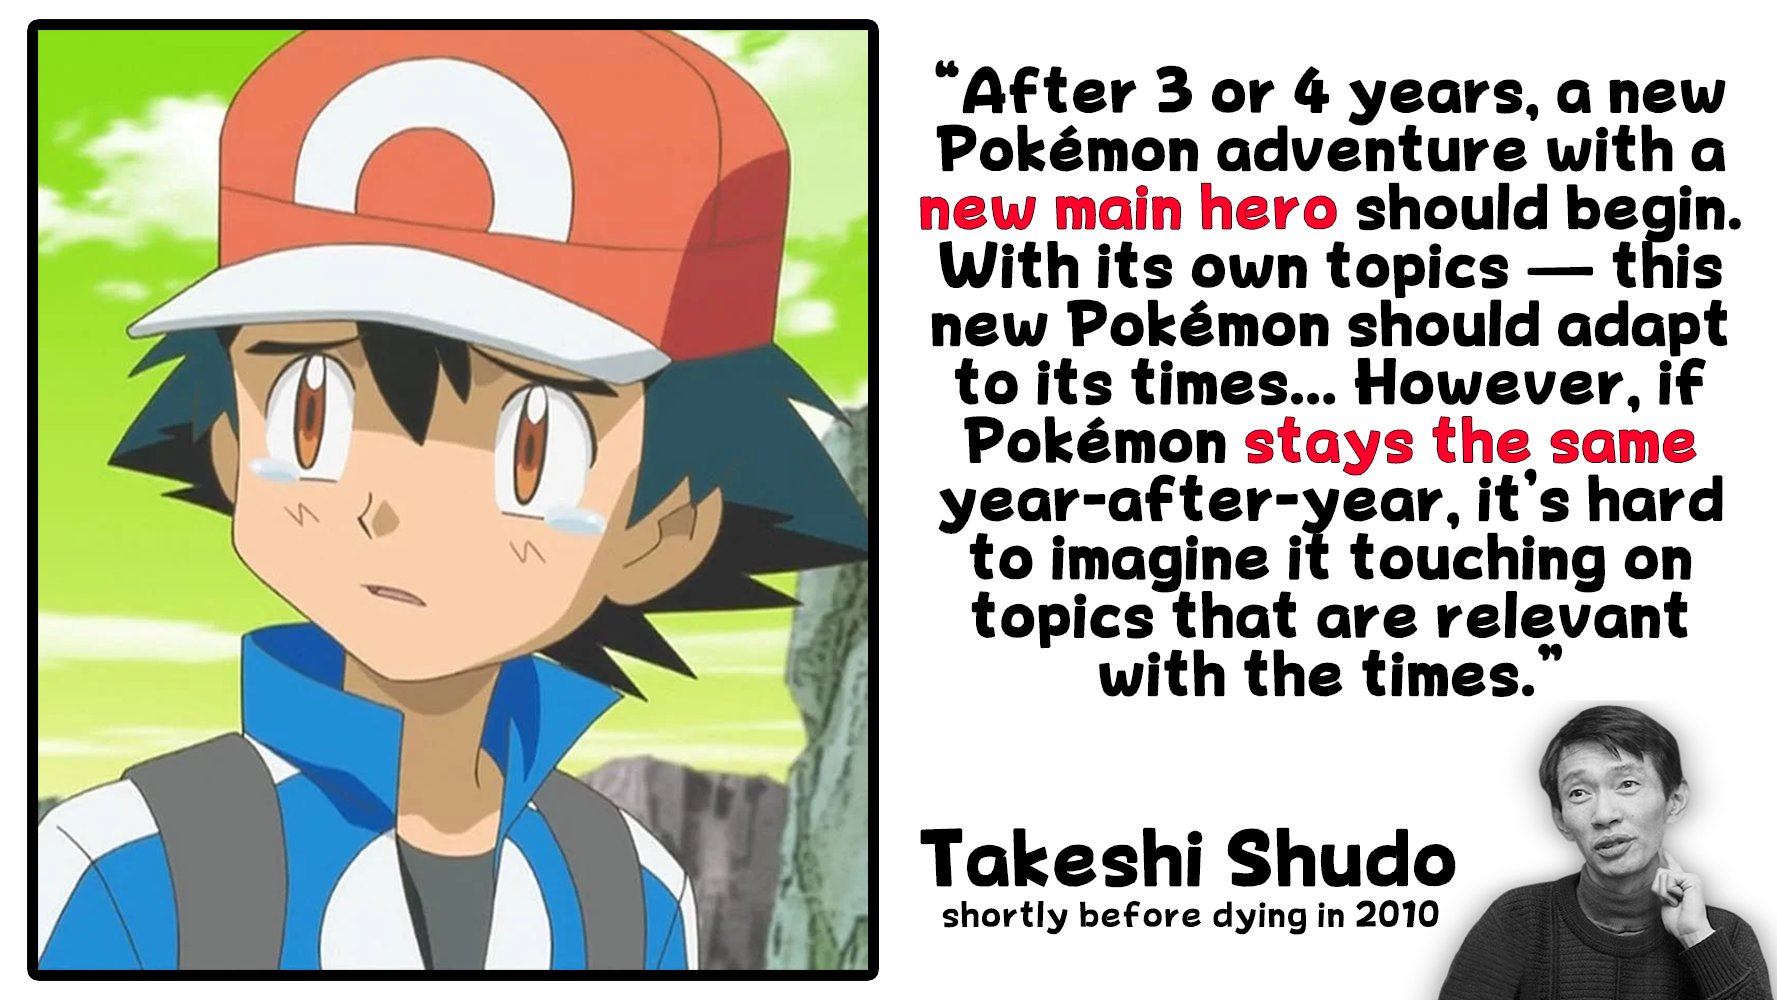 Is Pokemon Preparing to Part Ways with Ash Ketchum